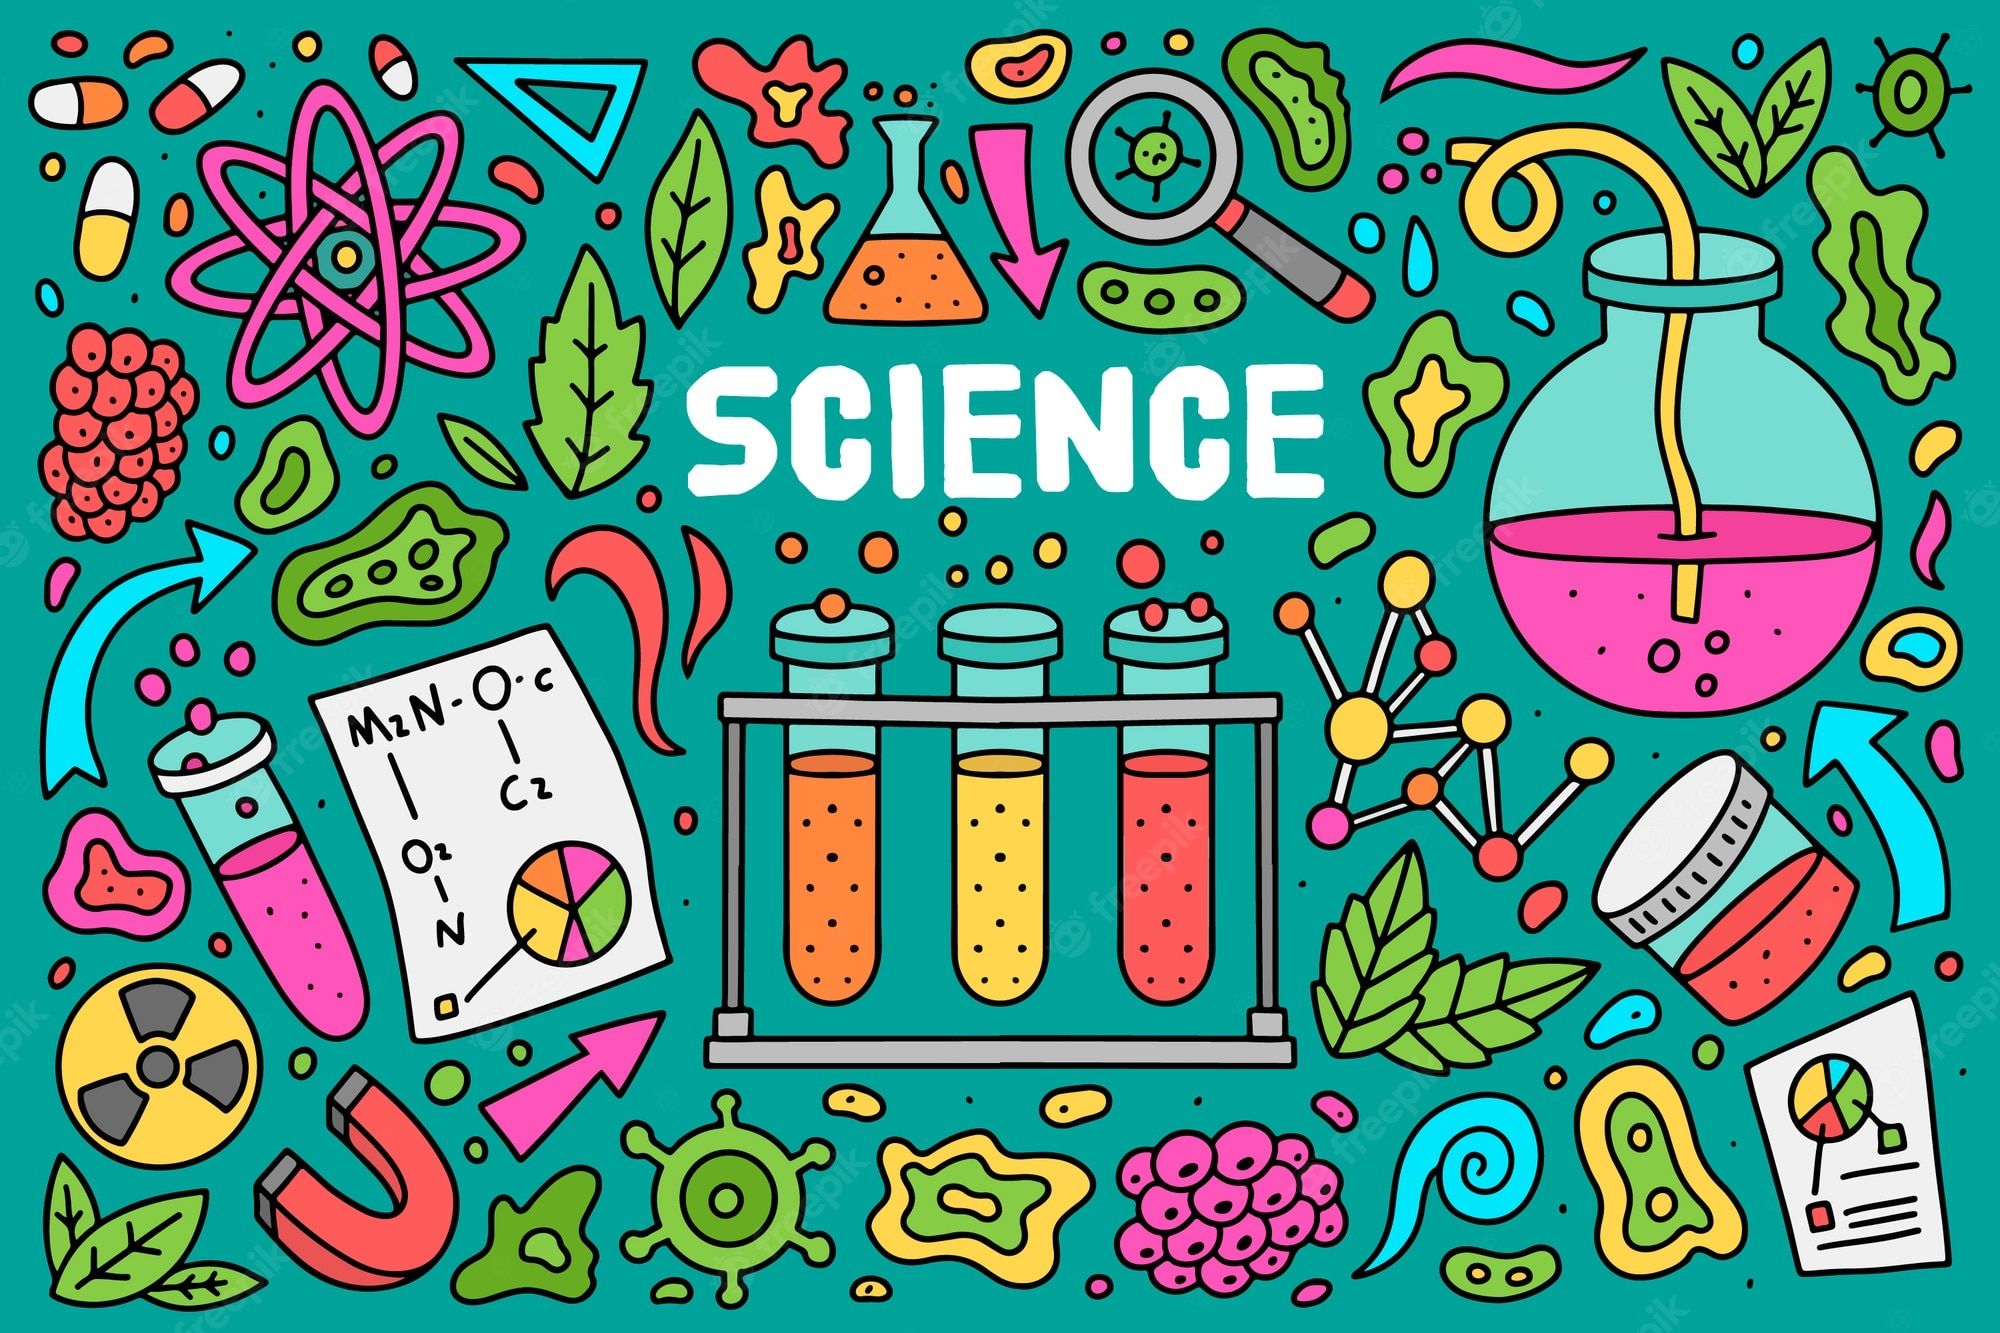 Science Background Image